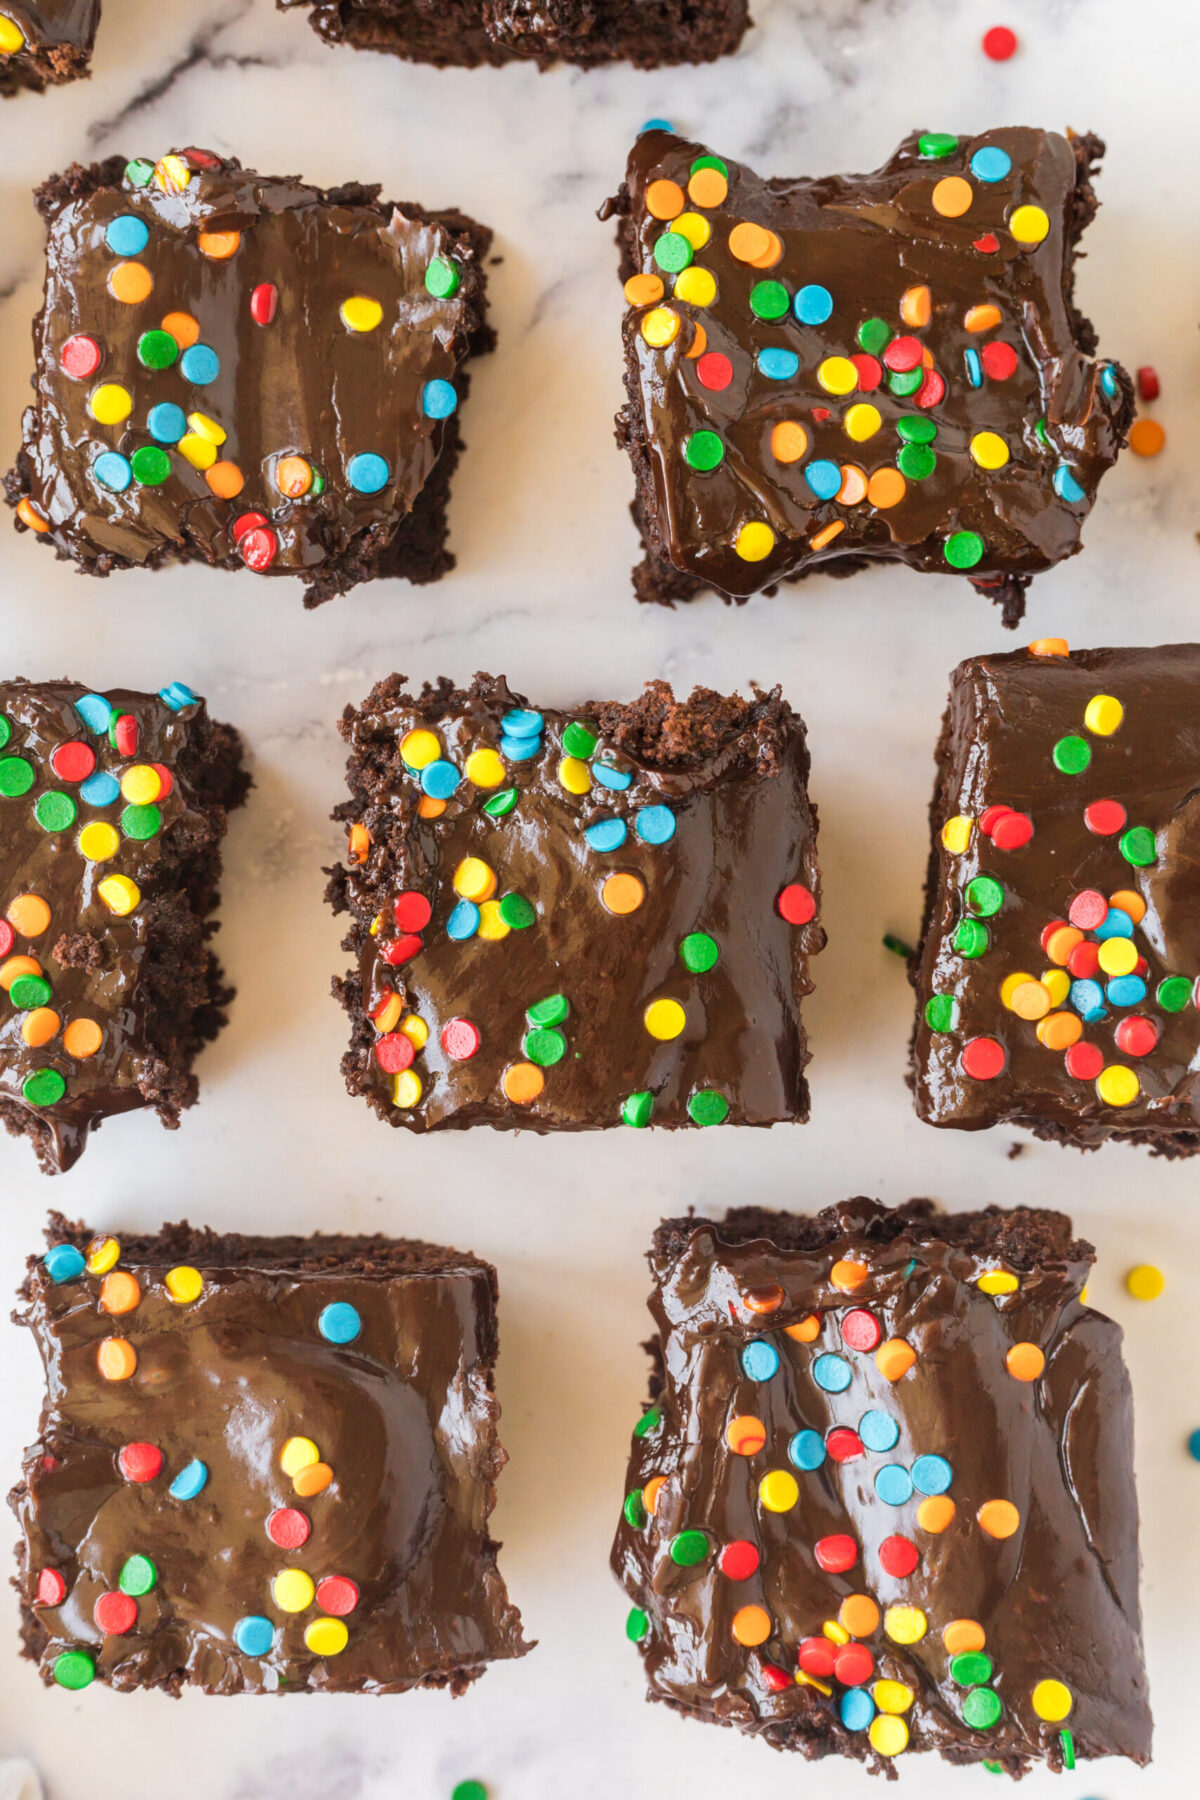 cosmic brownie recipe. Brownie squares on white surface